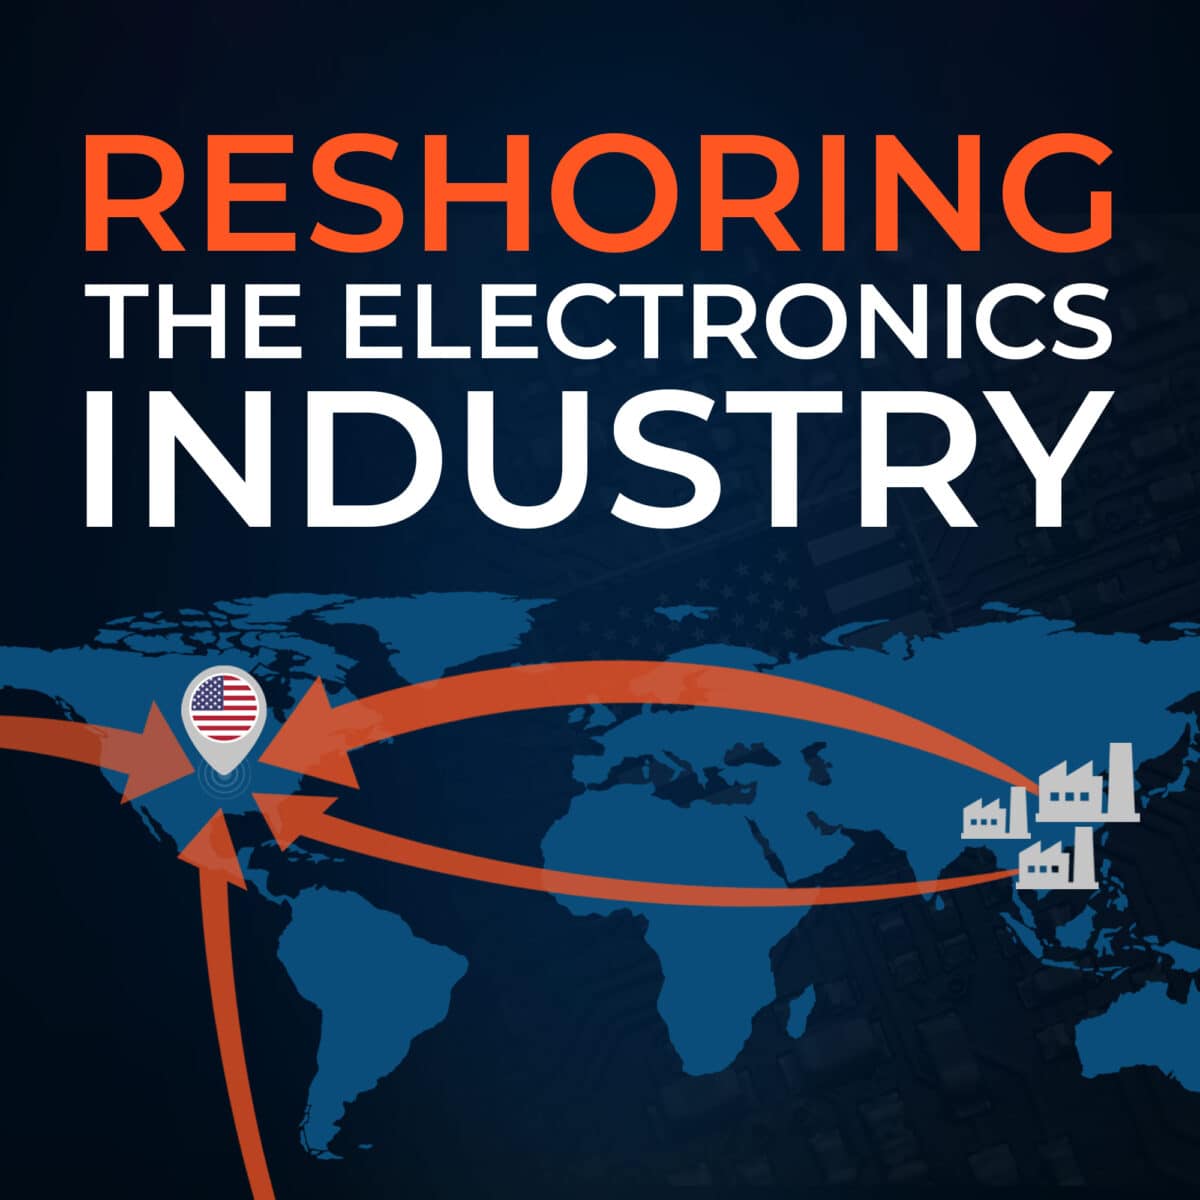 Reshoring the Electronics Industry: Are the Benefits Worth the Risks?